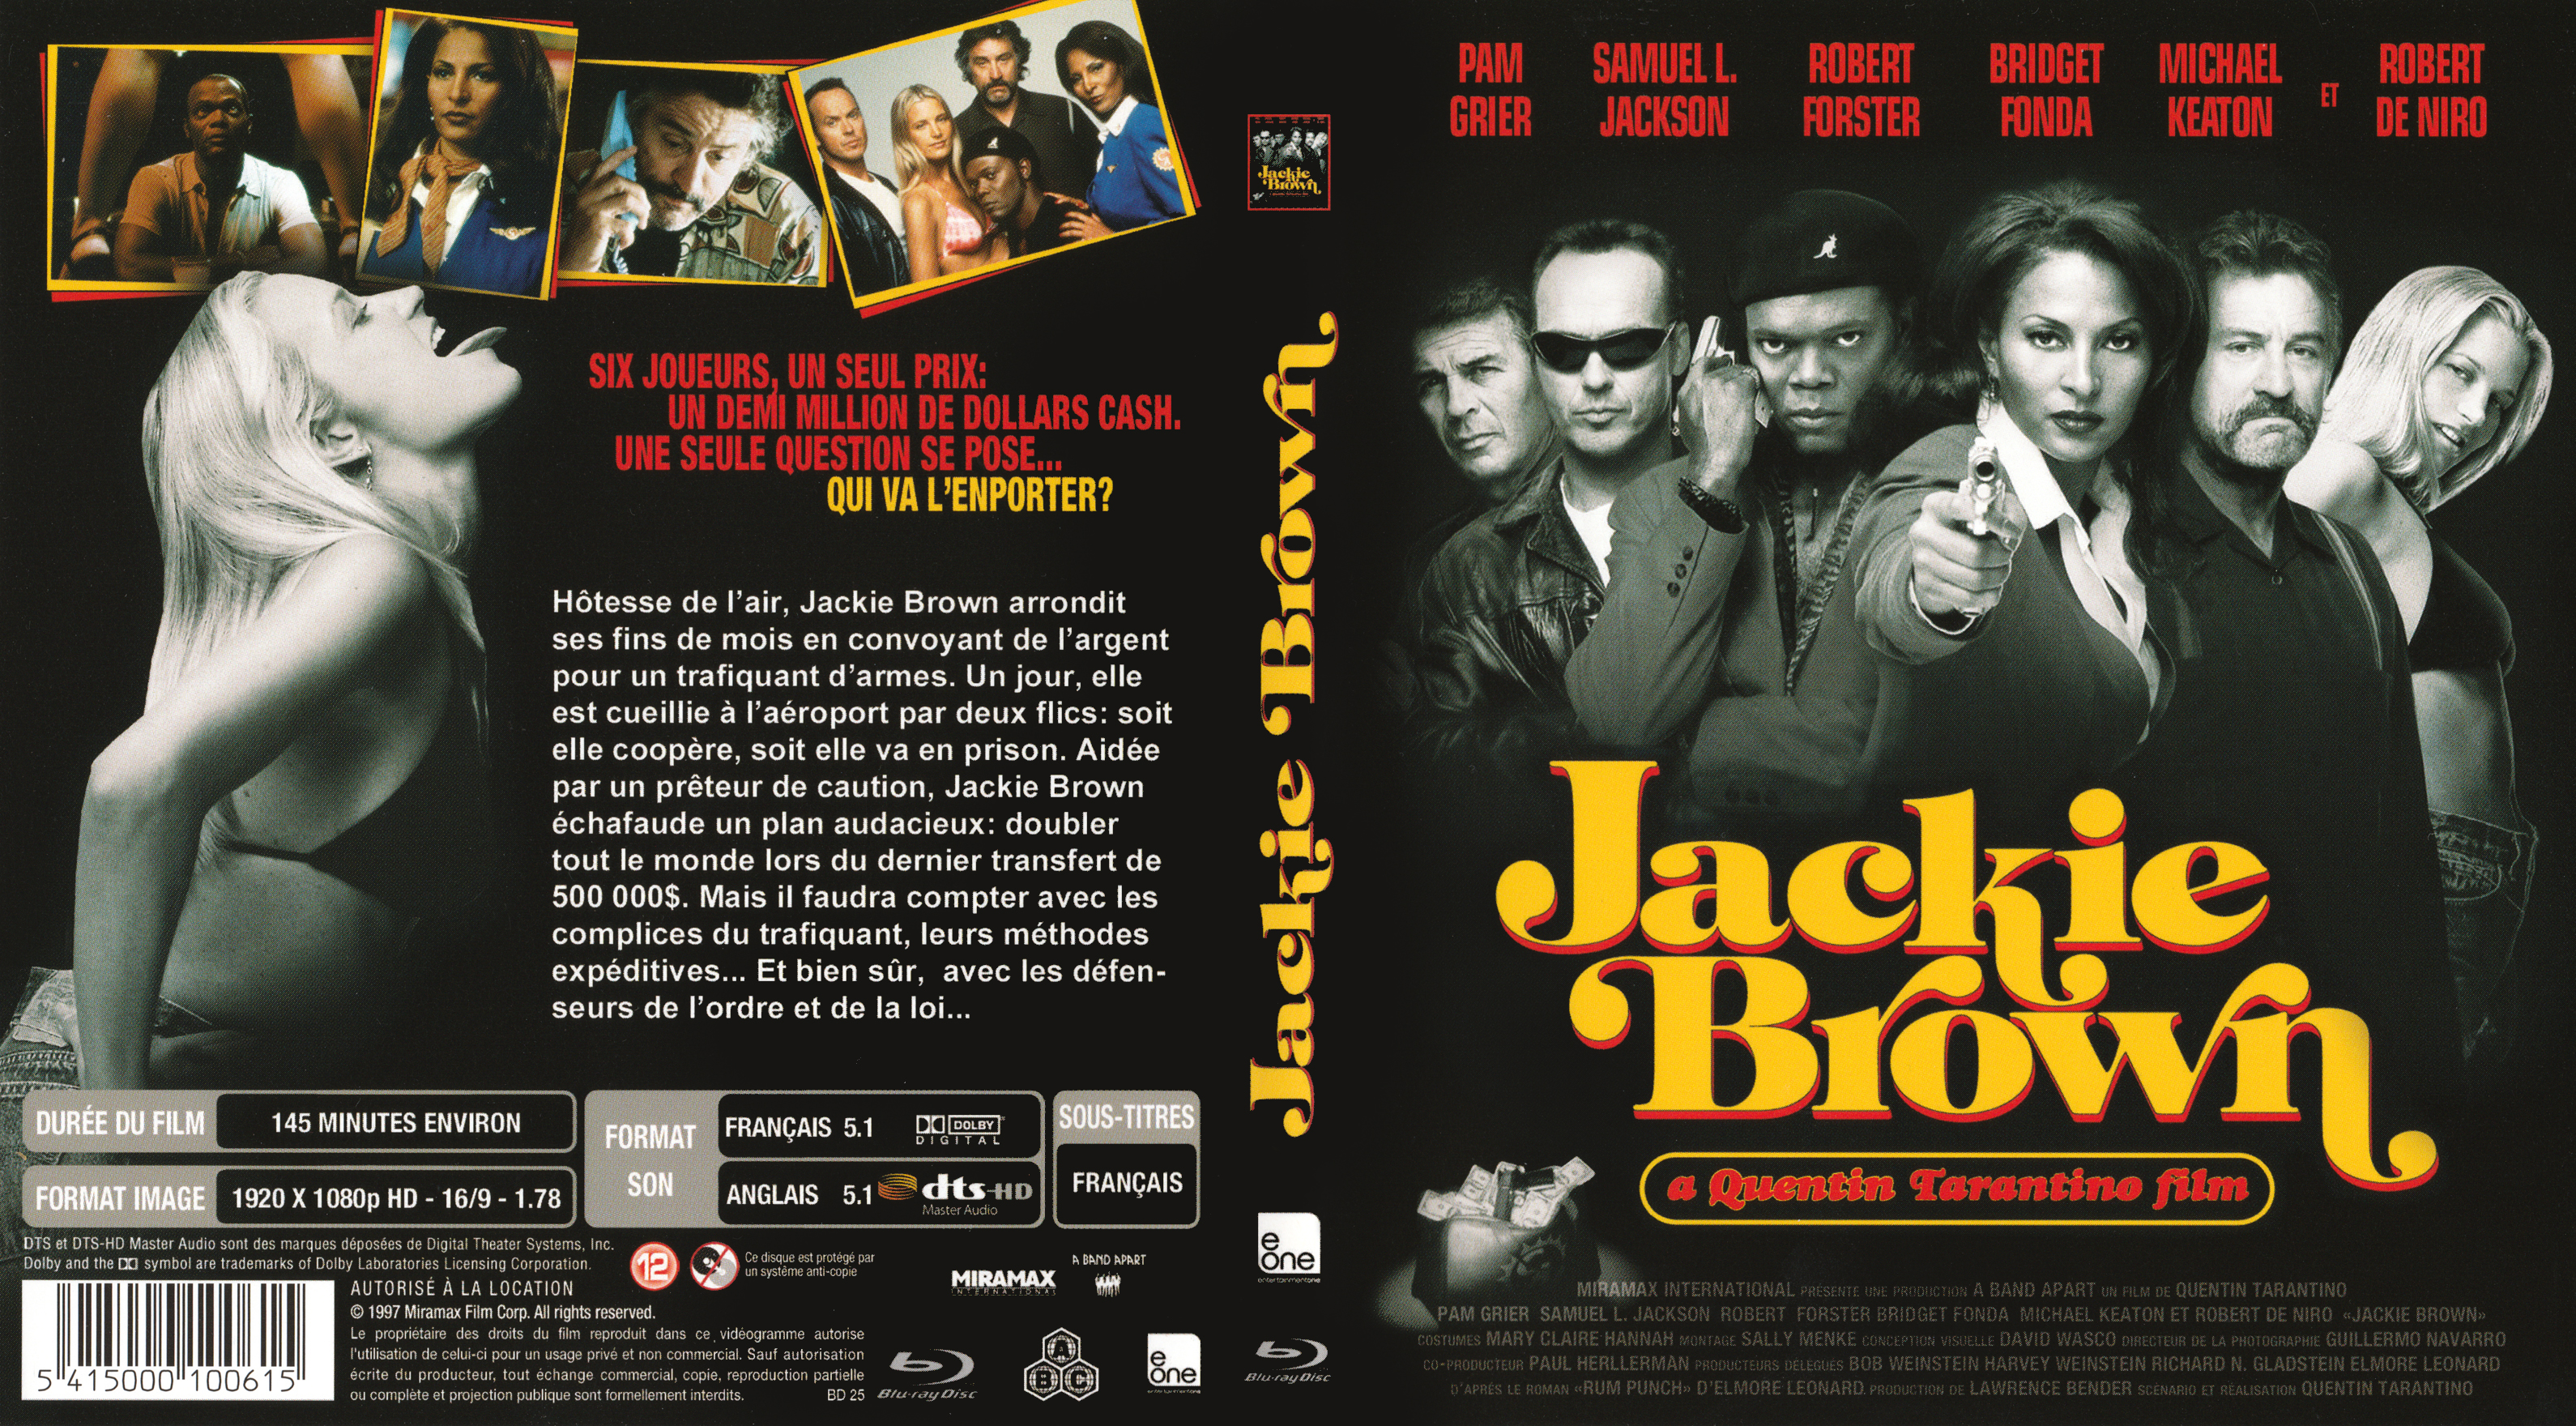 Jaquette DVD Jackie brown (BLU-RAY) v2